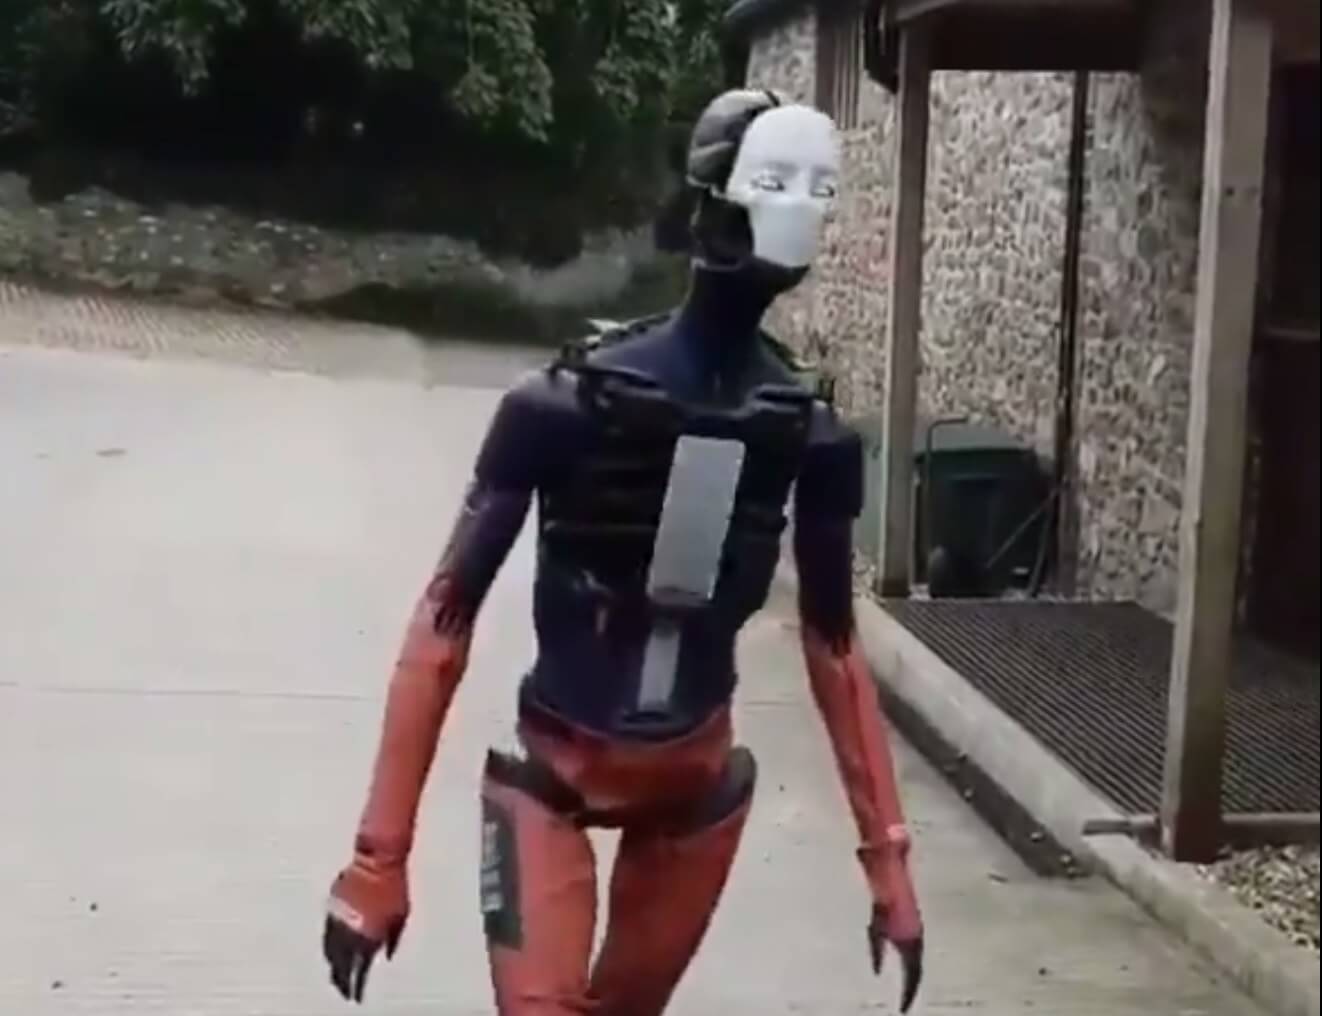 Humanoid robot video that terrified the internet isn't real